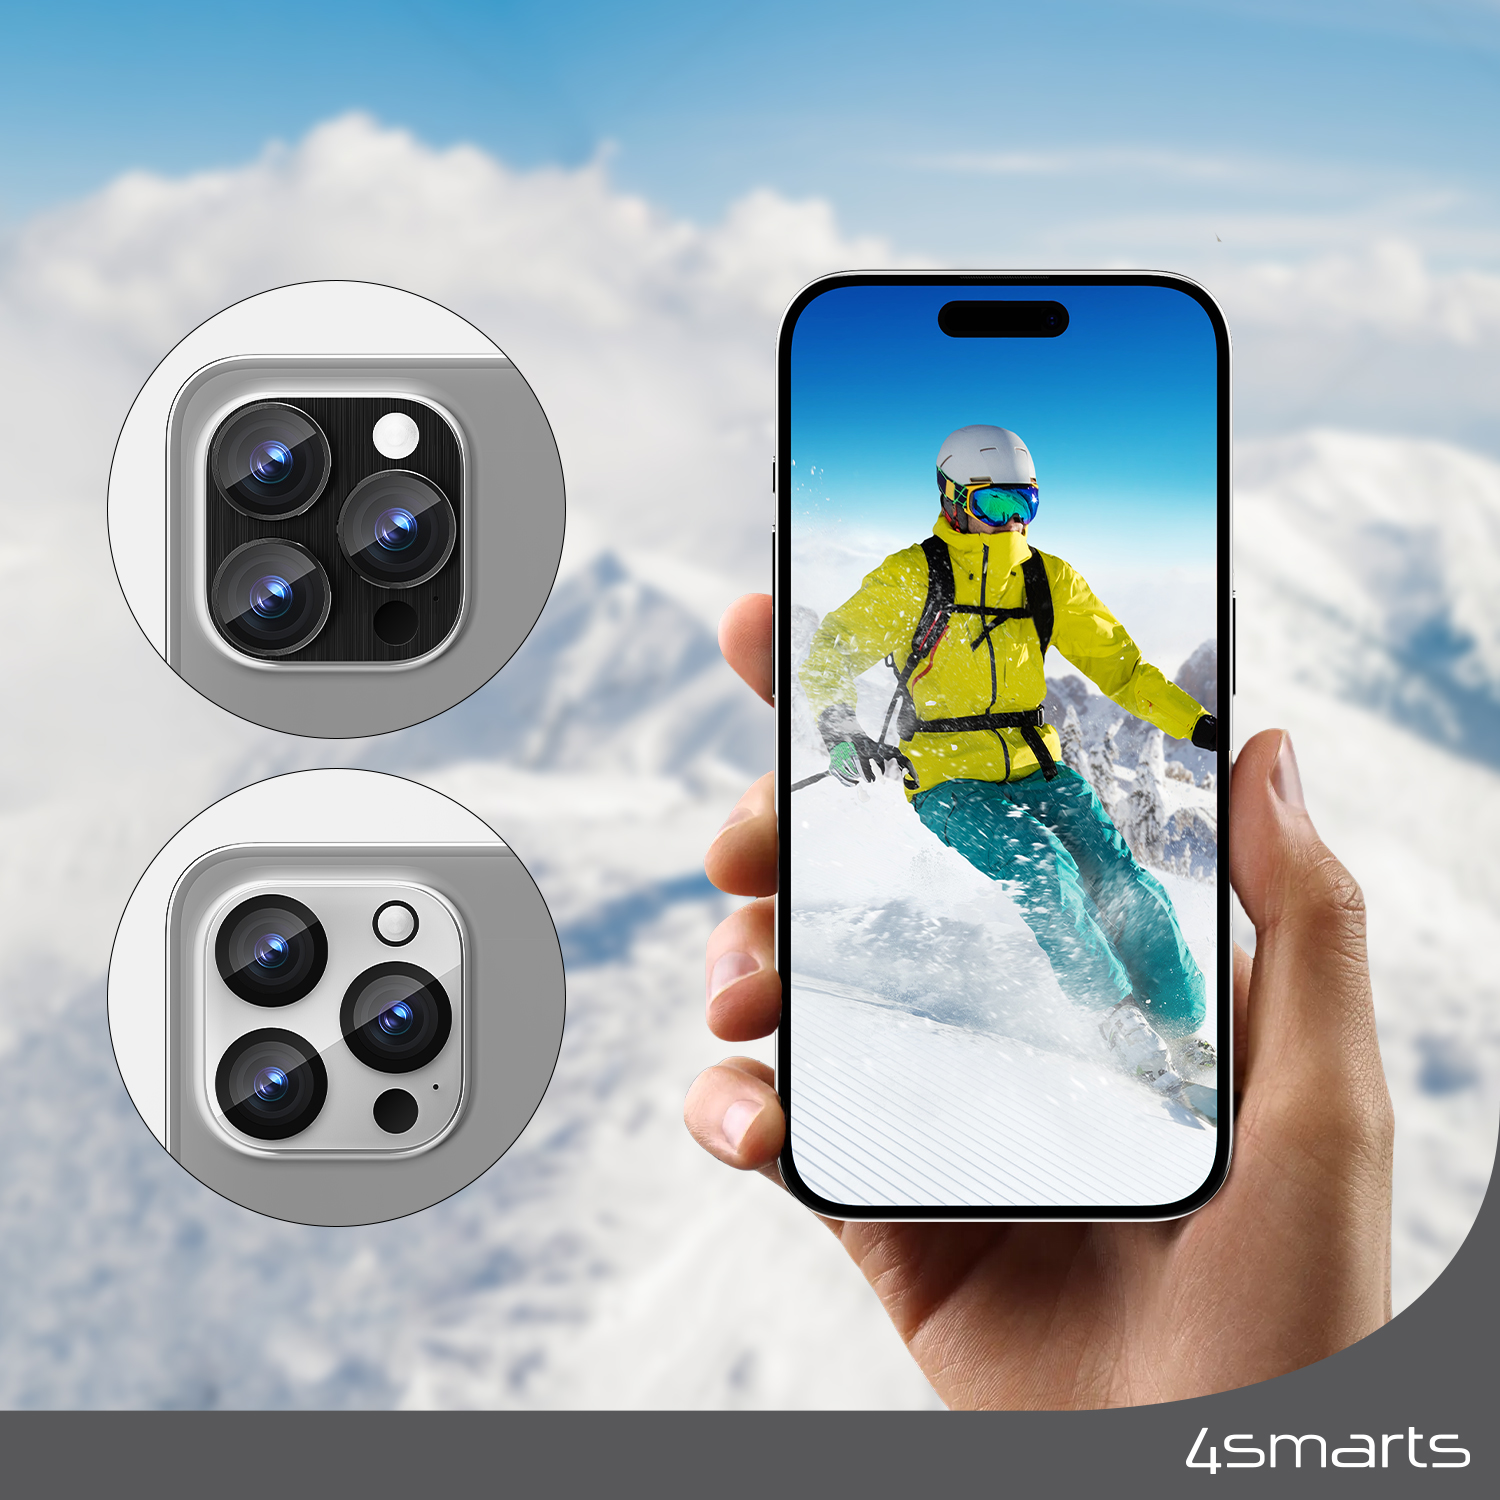 The specially designed 4smarts Lens Protector StyleGlass for Apple iPhone 15 Pro / 15 Pro Max Set of 2 protects the valuable lens of your iPhone camera even when skiing, without affecting the image quality.